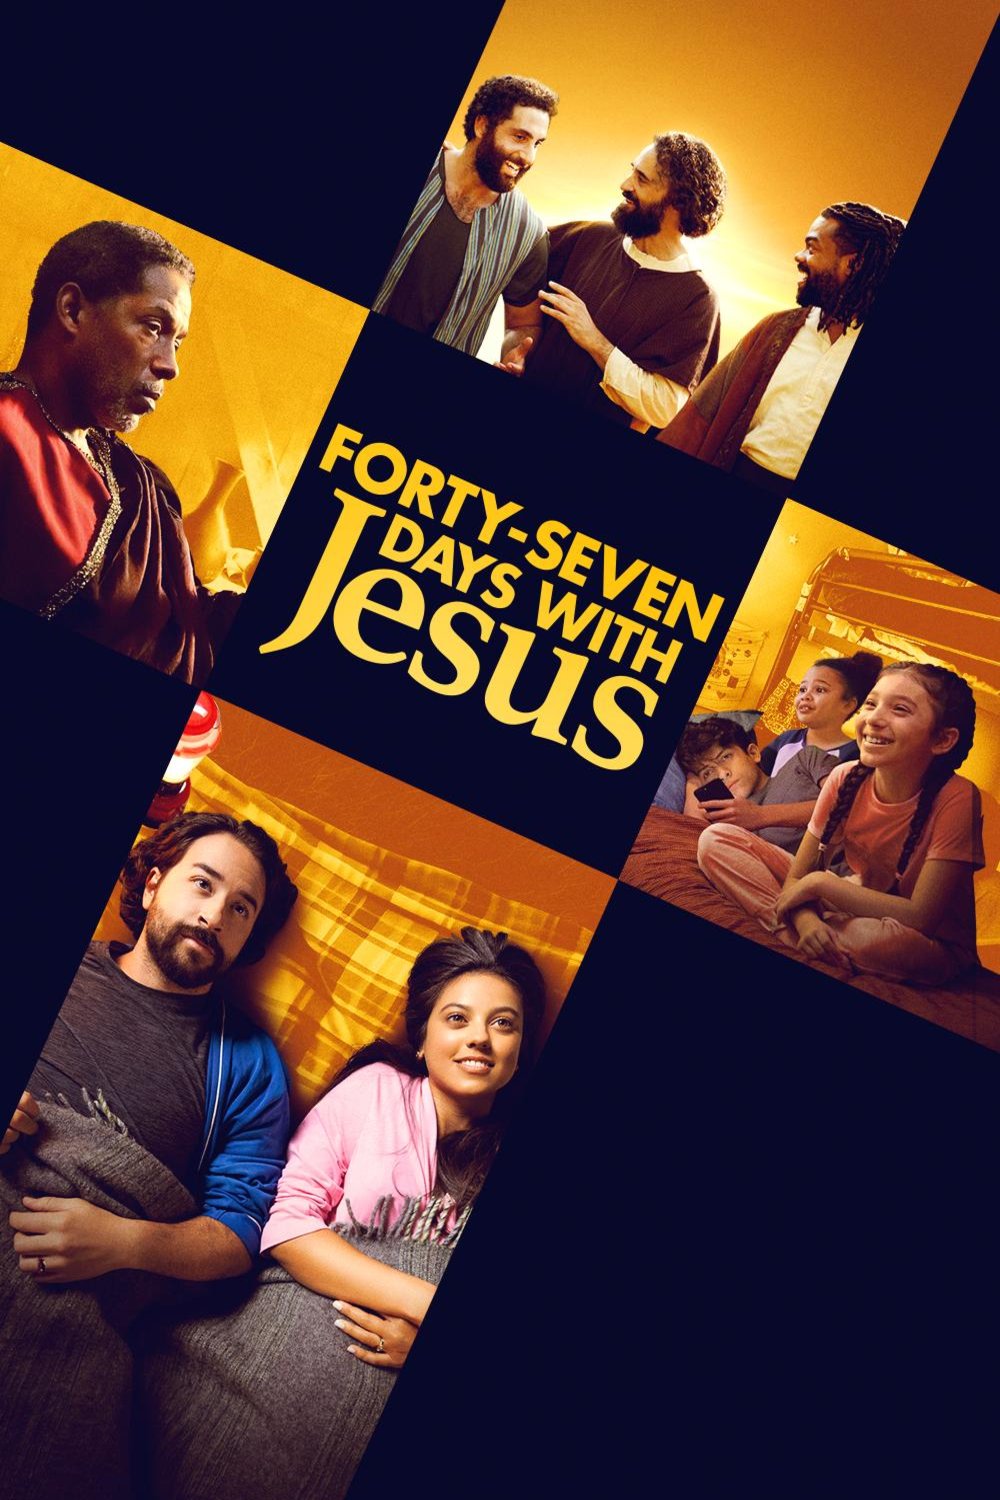 Poster of the movie Forty-Seven Days with Jesus